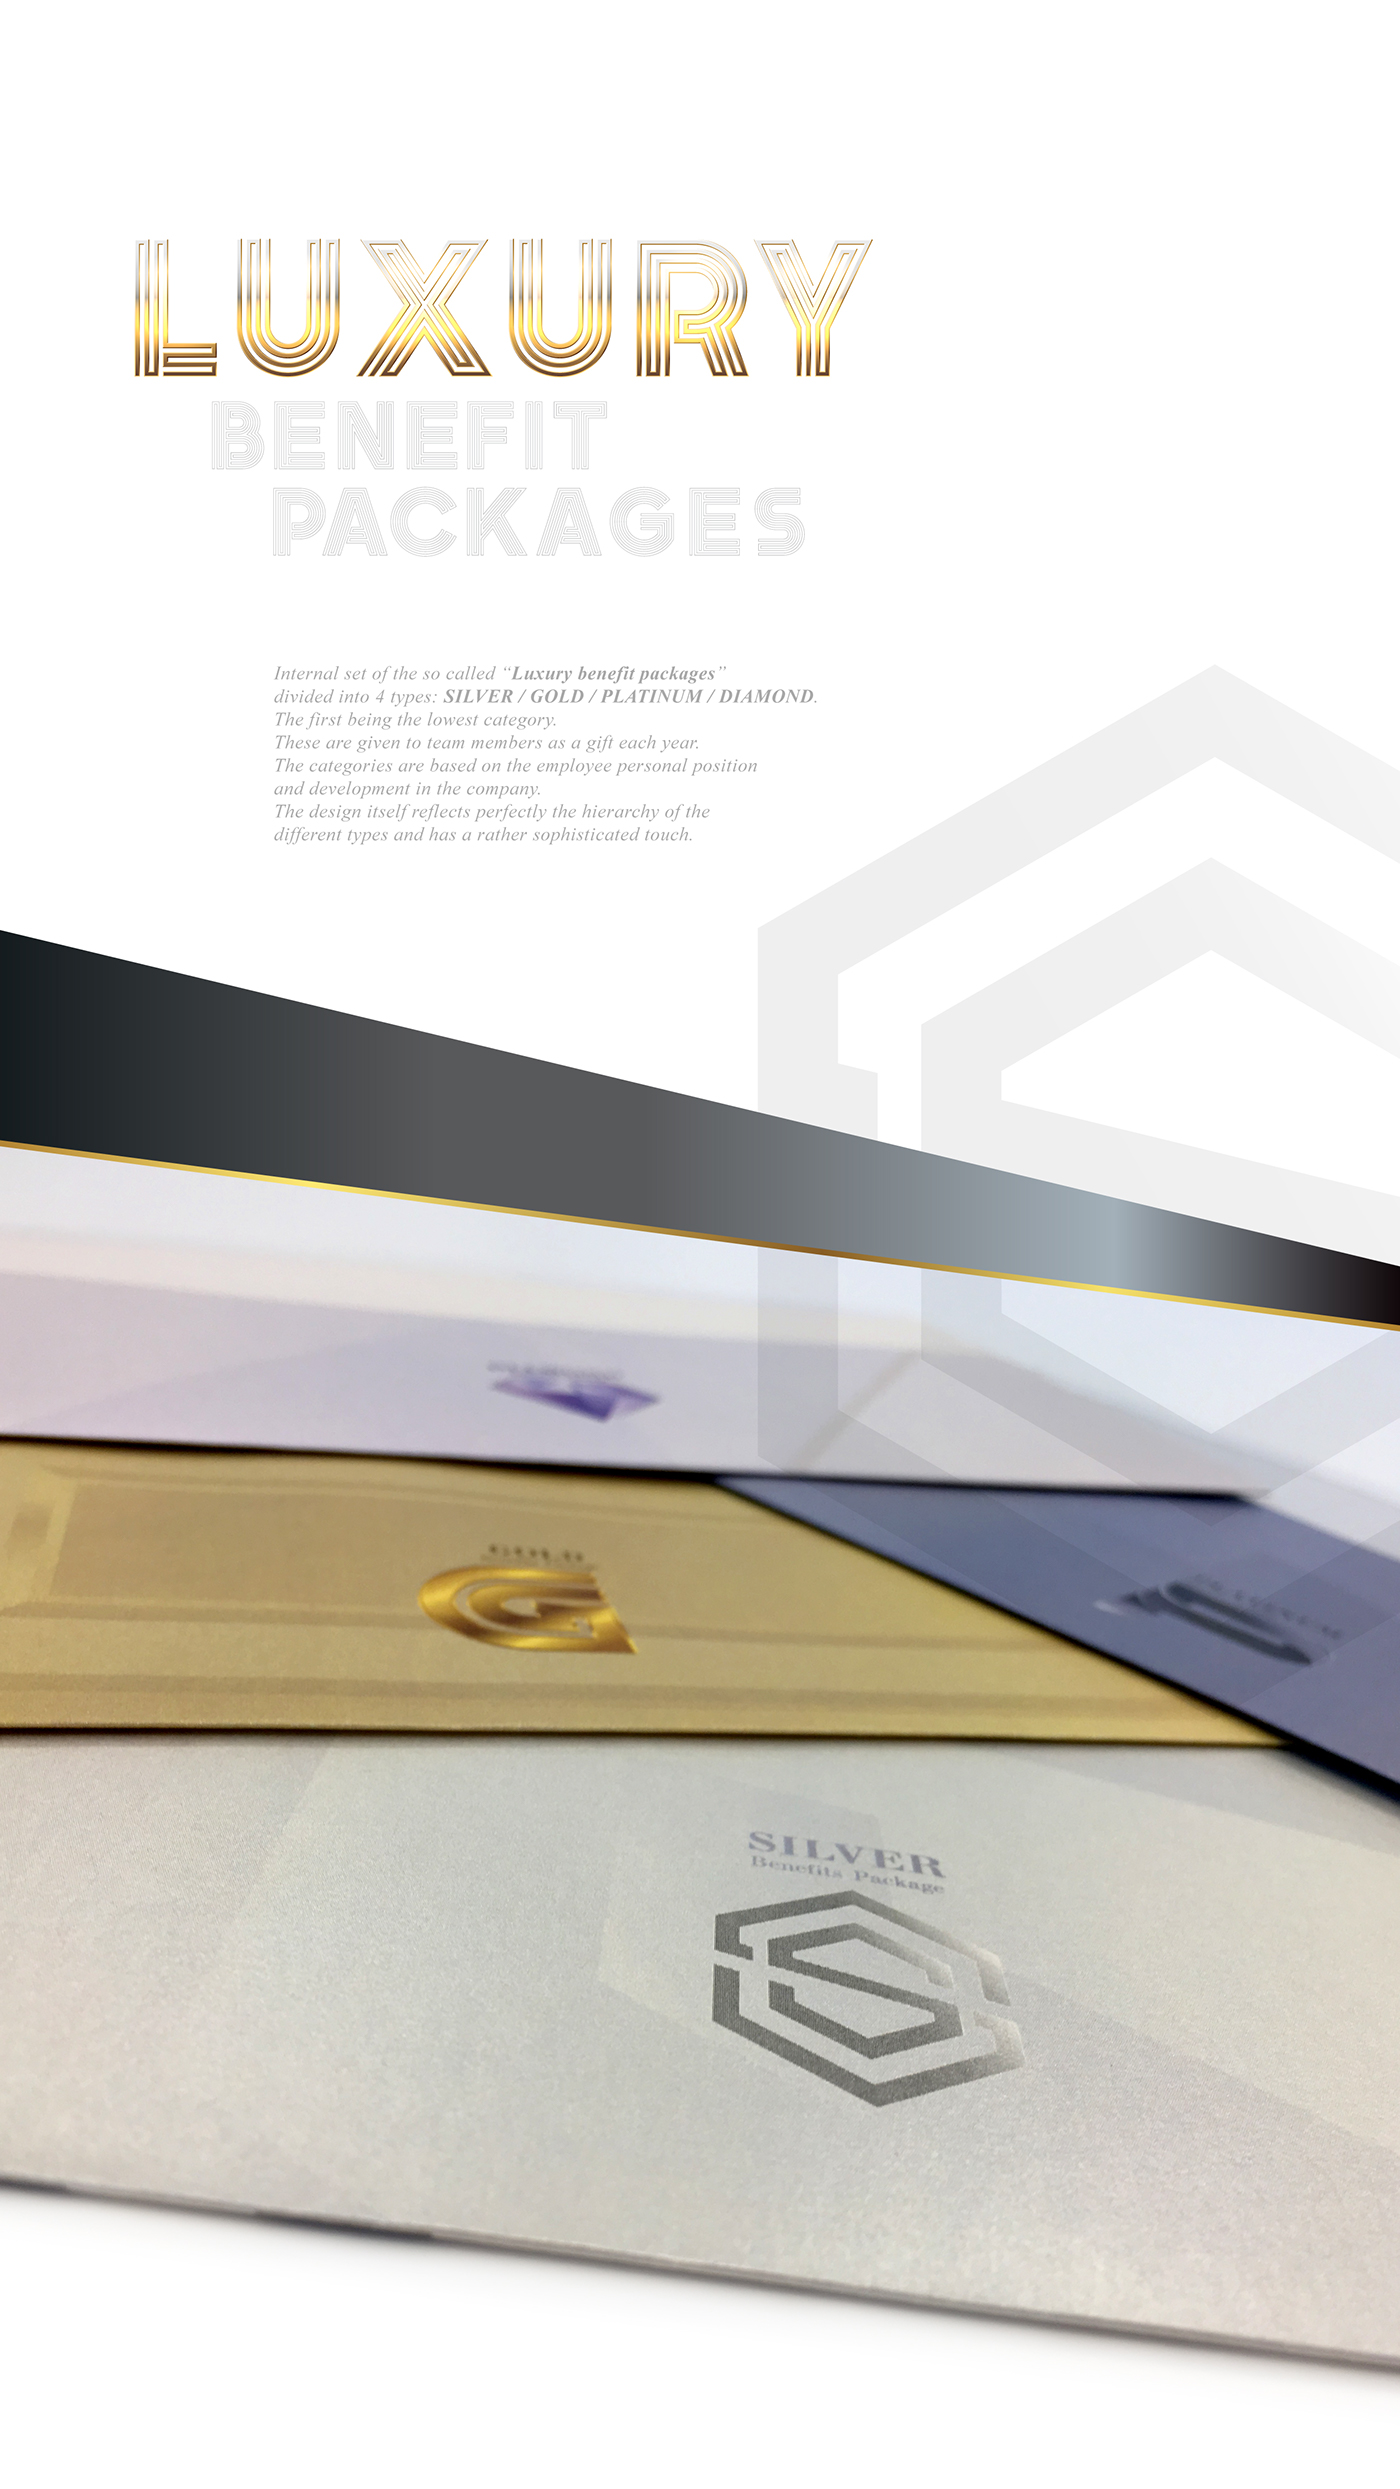 luxury logo corporate benefits packagedesign sophisticated gold silver Platinum diamond 